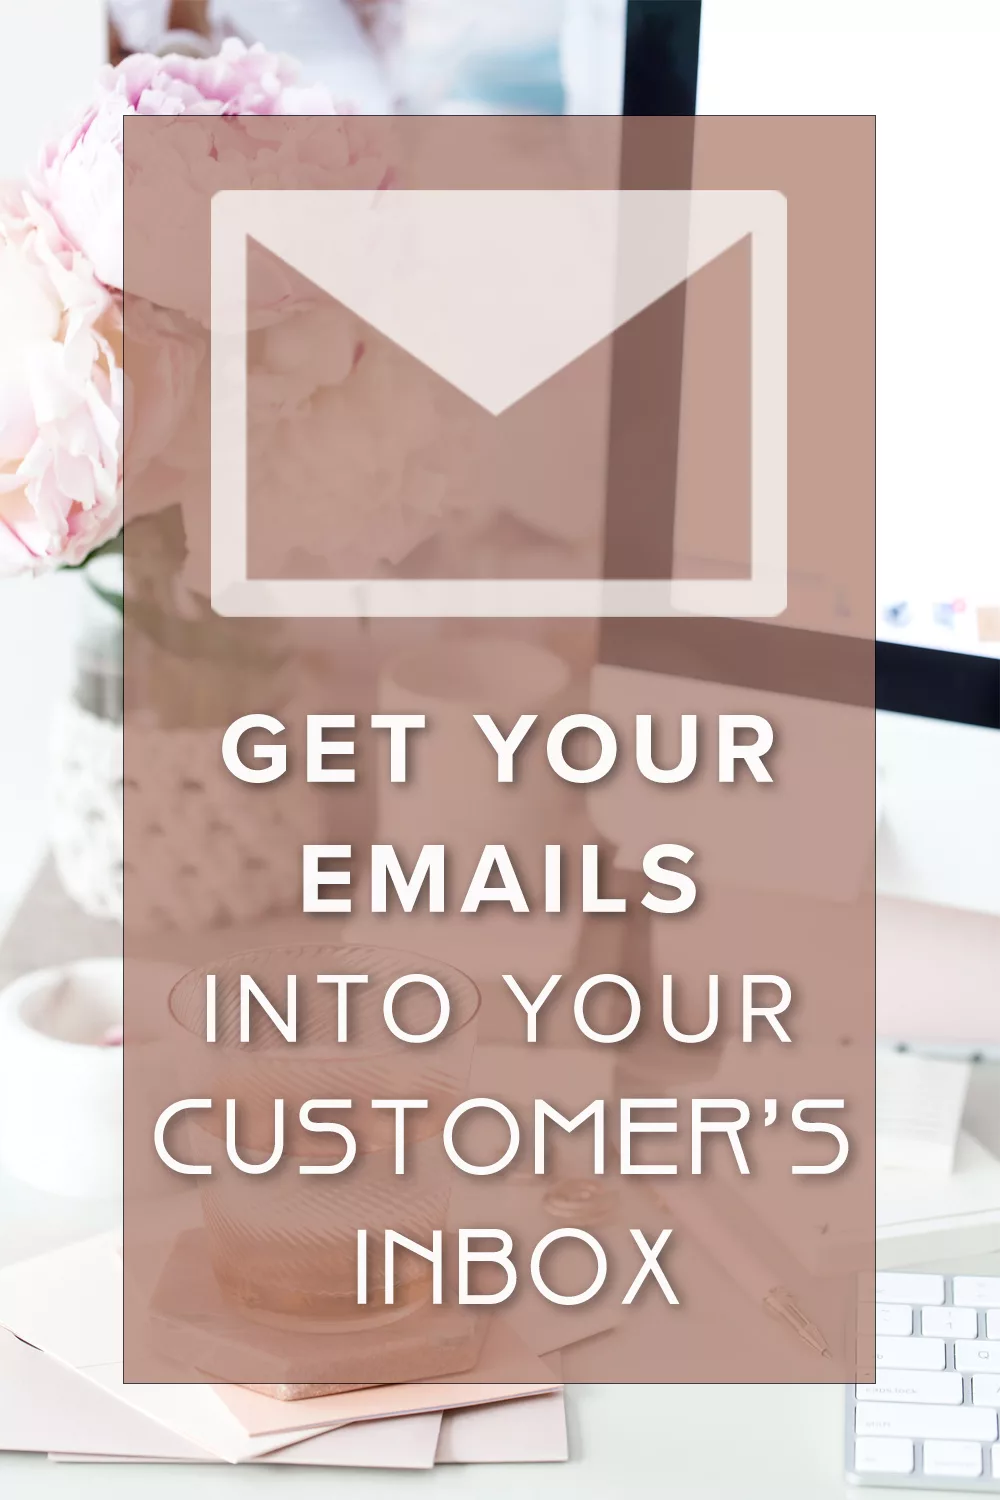 Get your emails into your customer's inbox